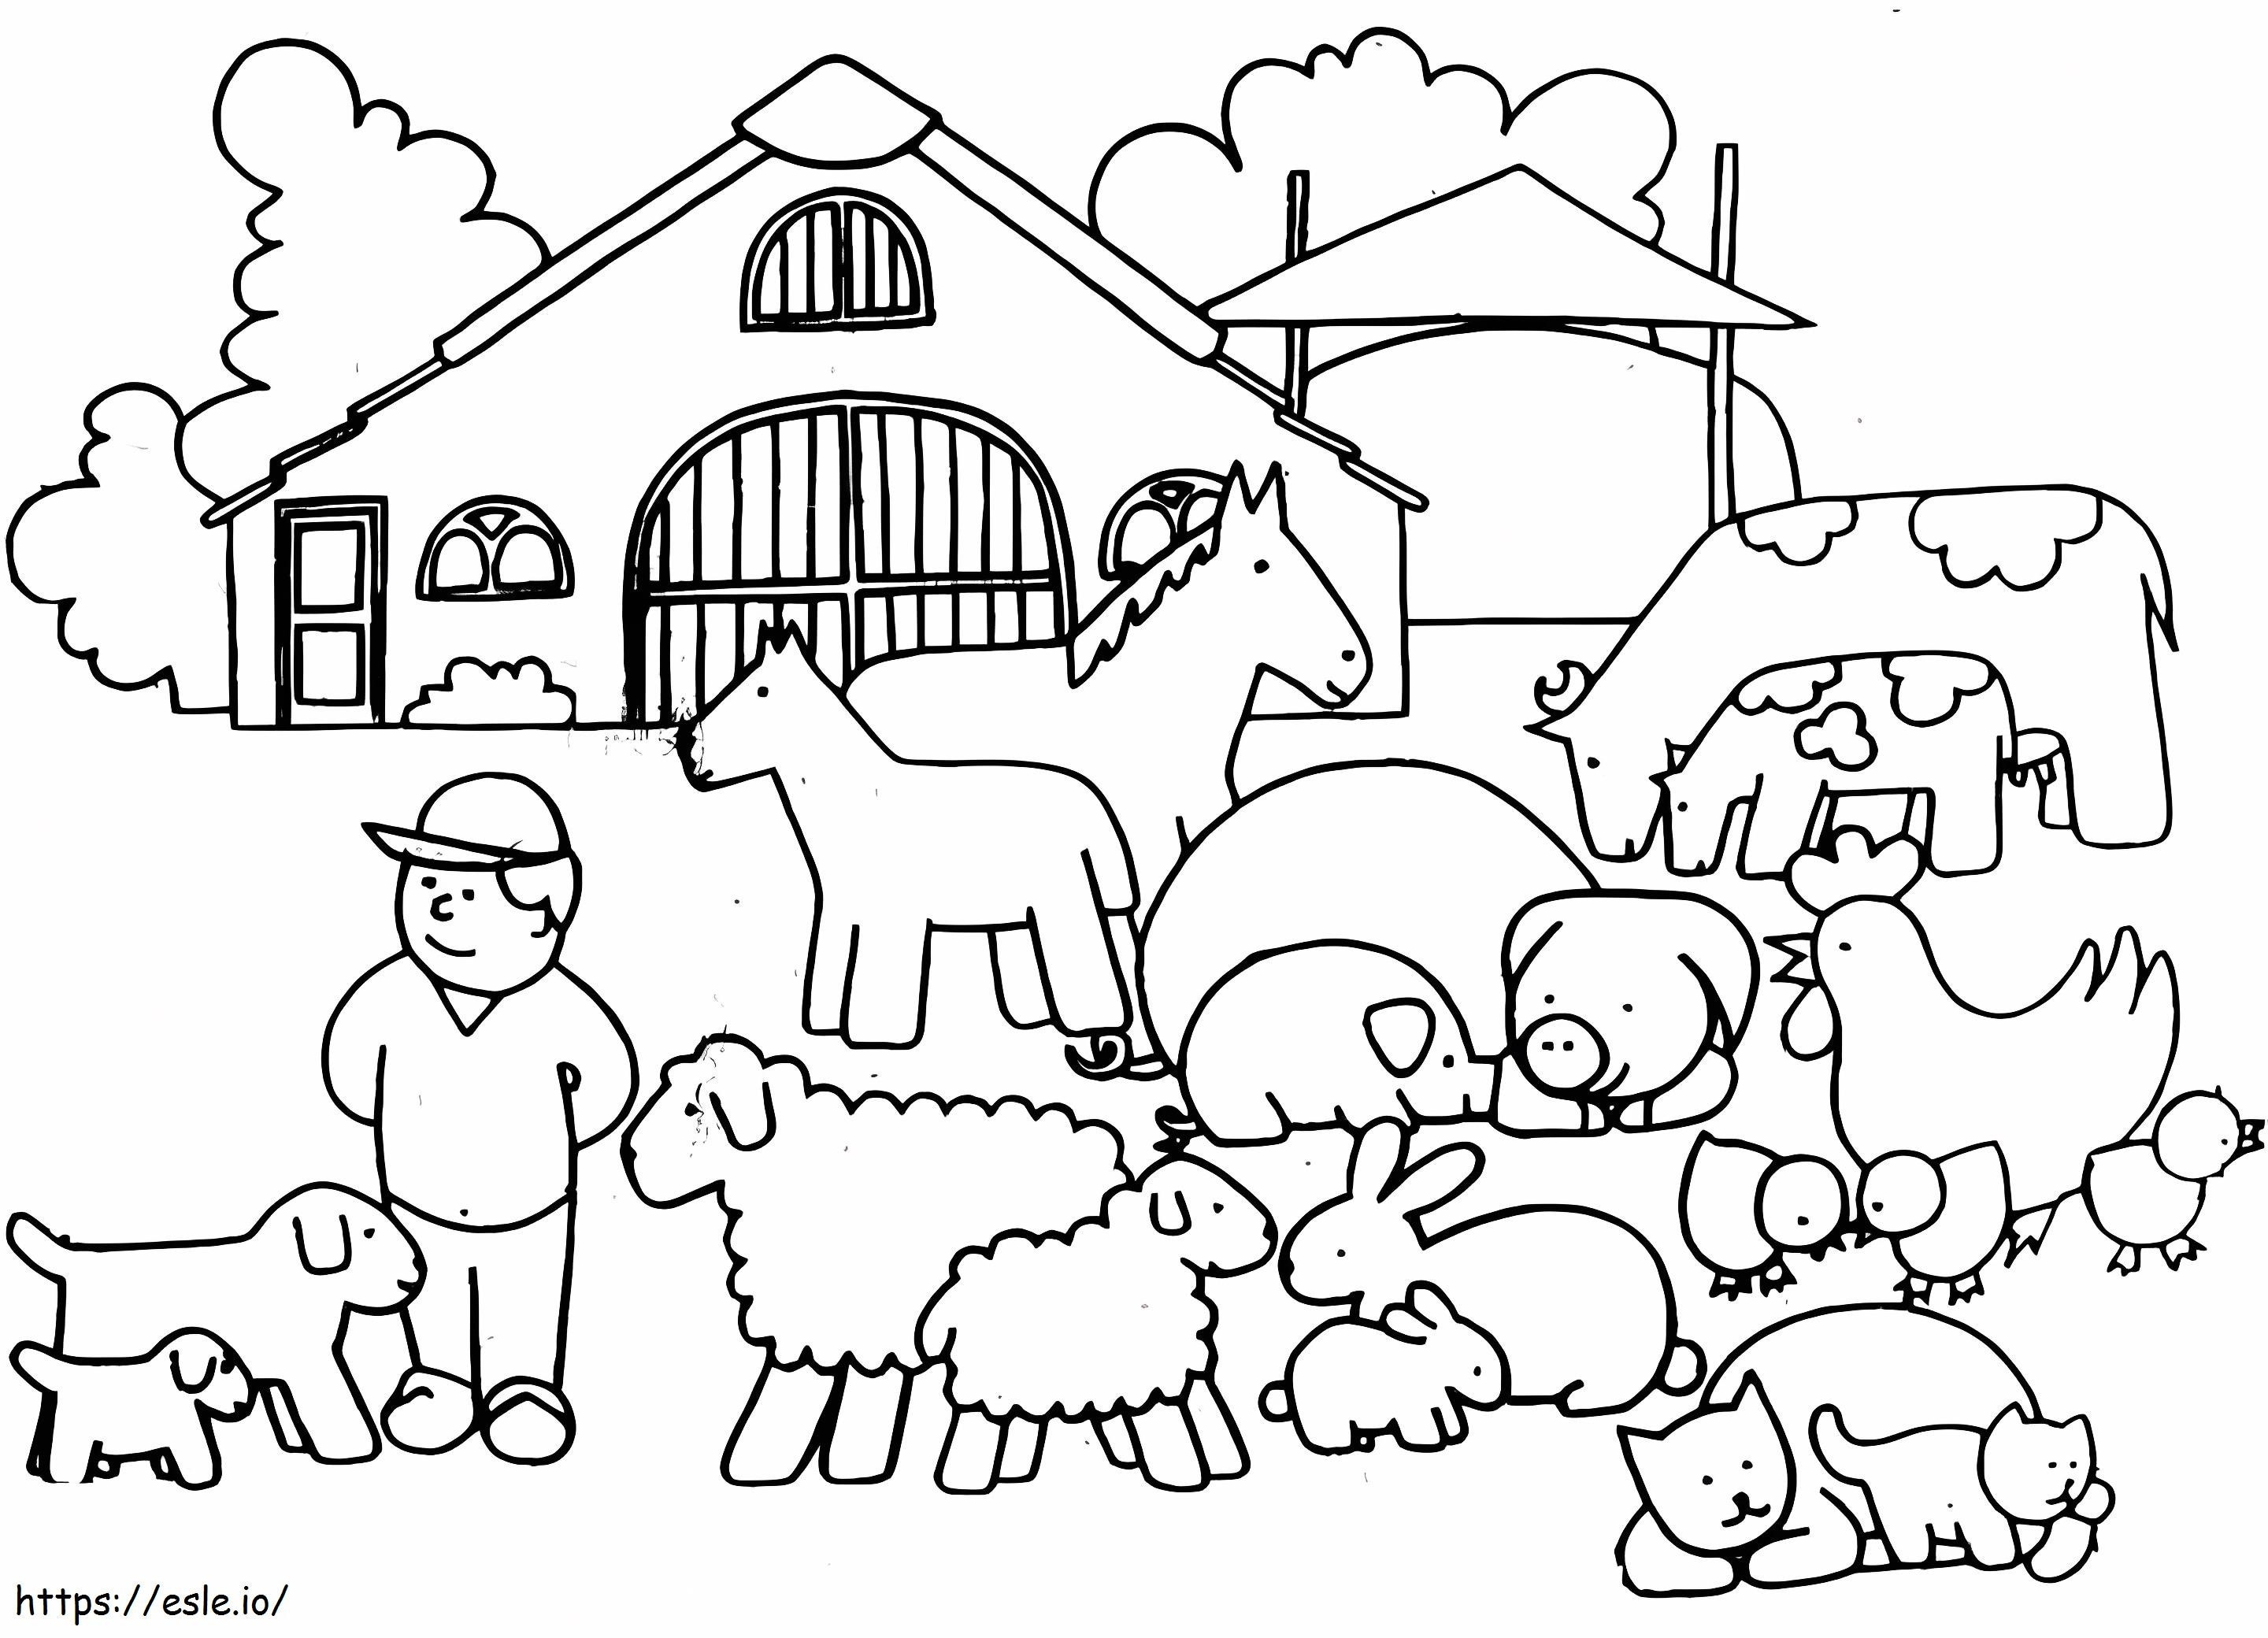 Animals And Farmer coloring page